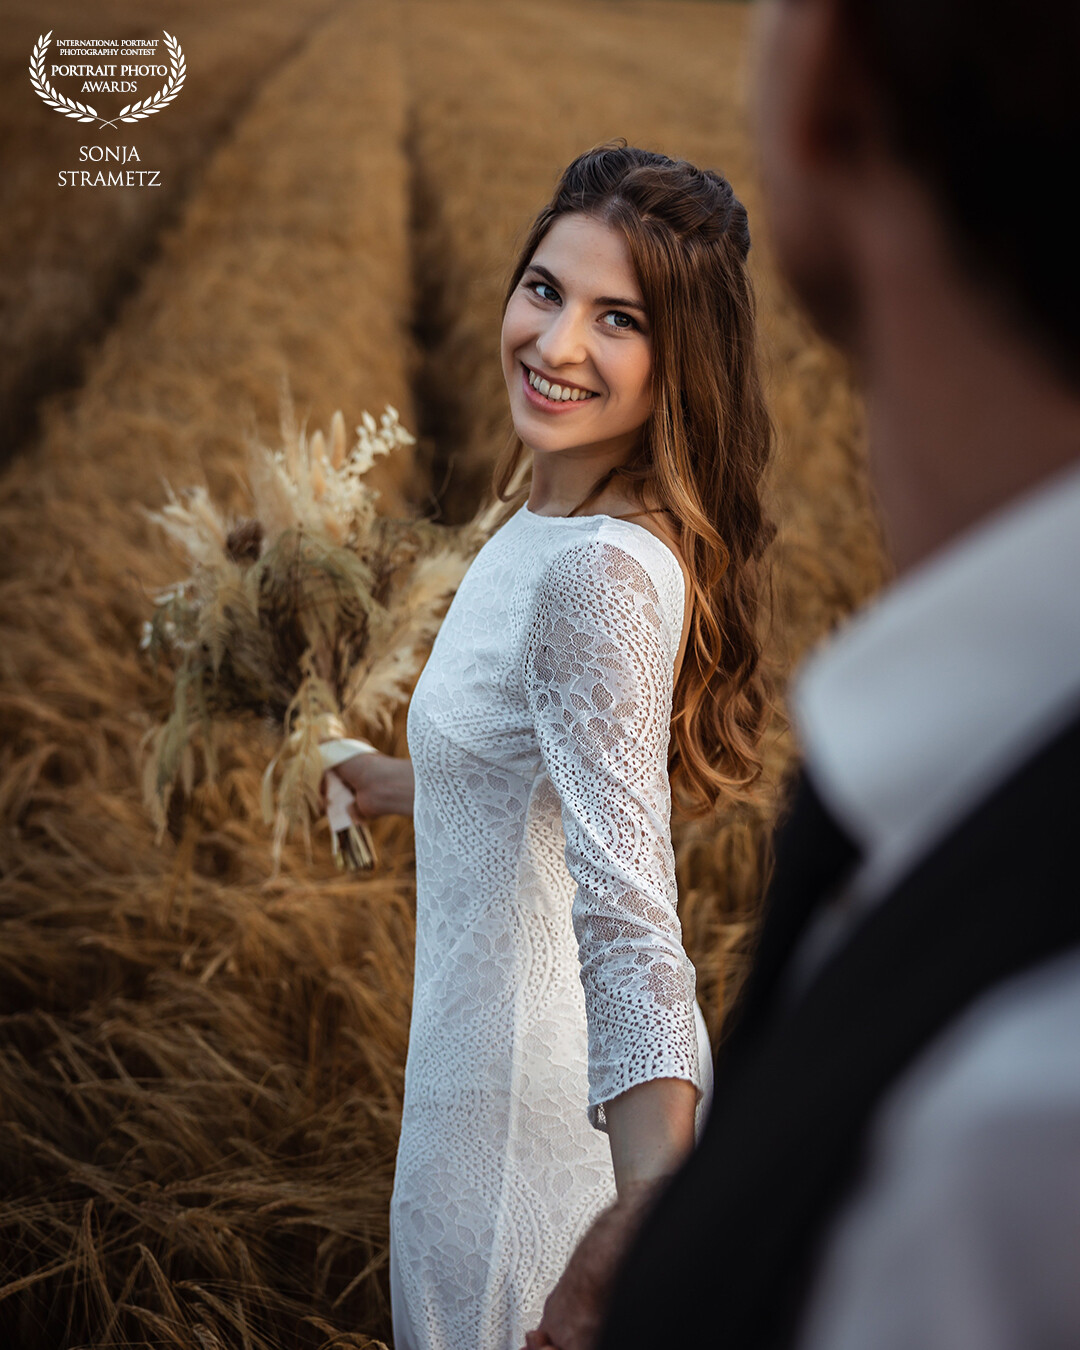 This two lovebirds were absolutely gourgeous during this session. Perfect light and the corn field made a beautiful contrast to the white dress.